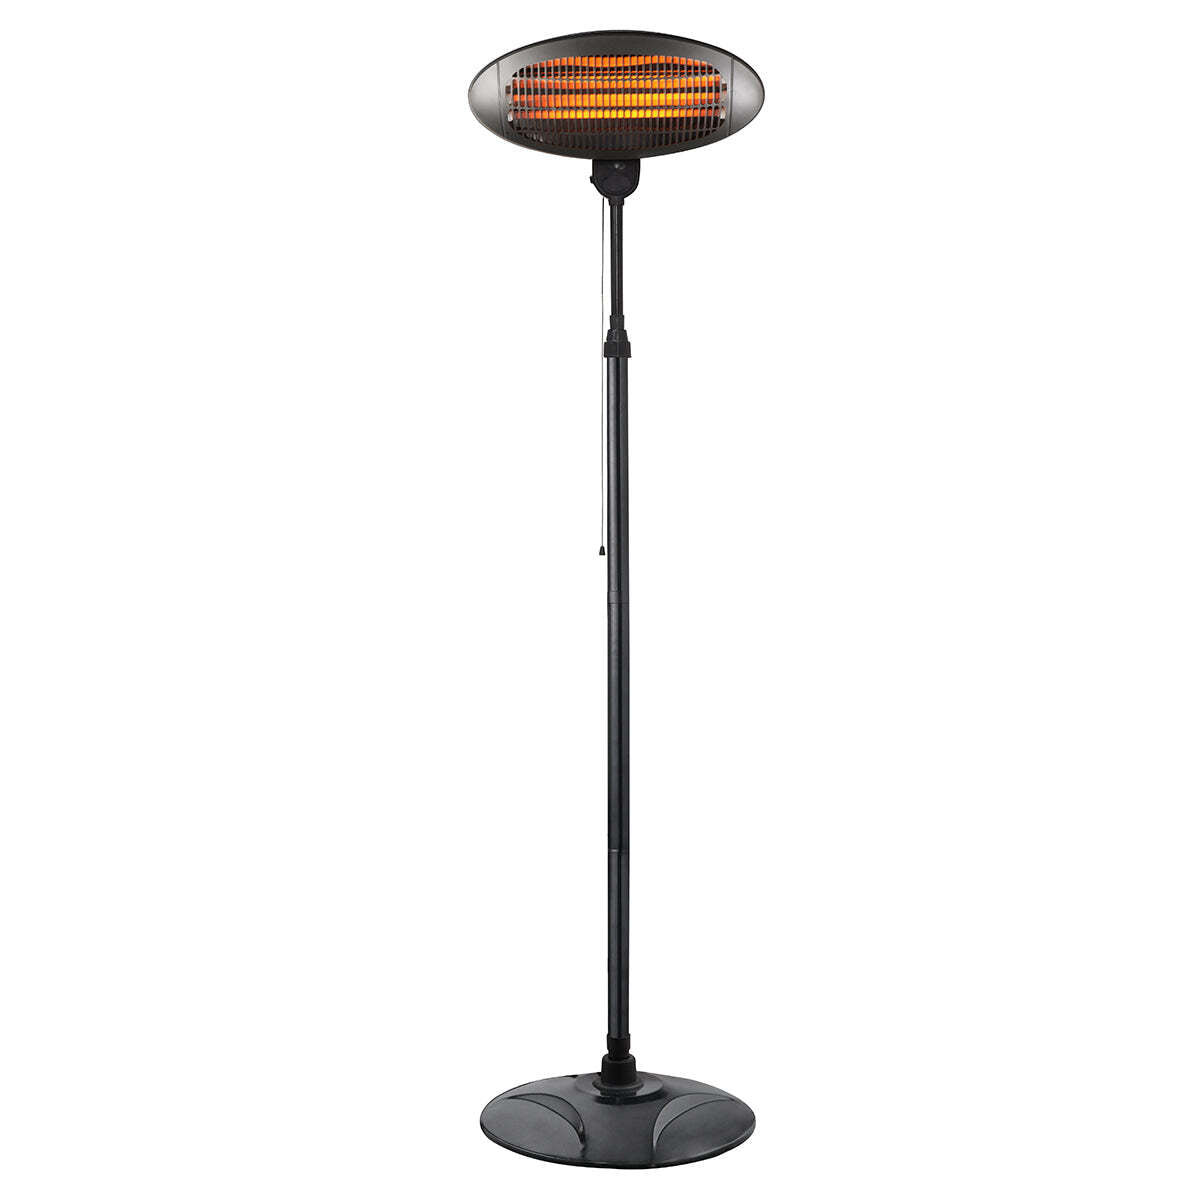 2000W 210cm Free Standing Adjustable Portable Outdoor Electric Patio Heater Black